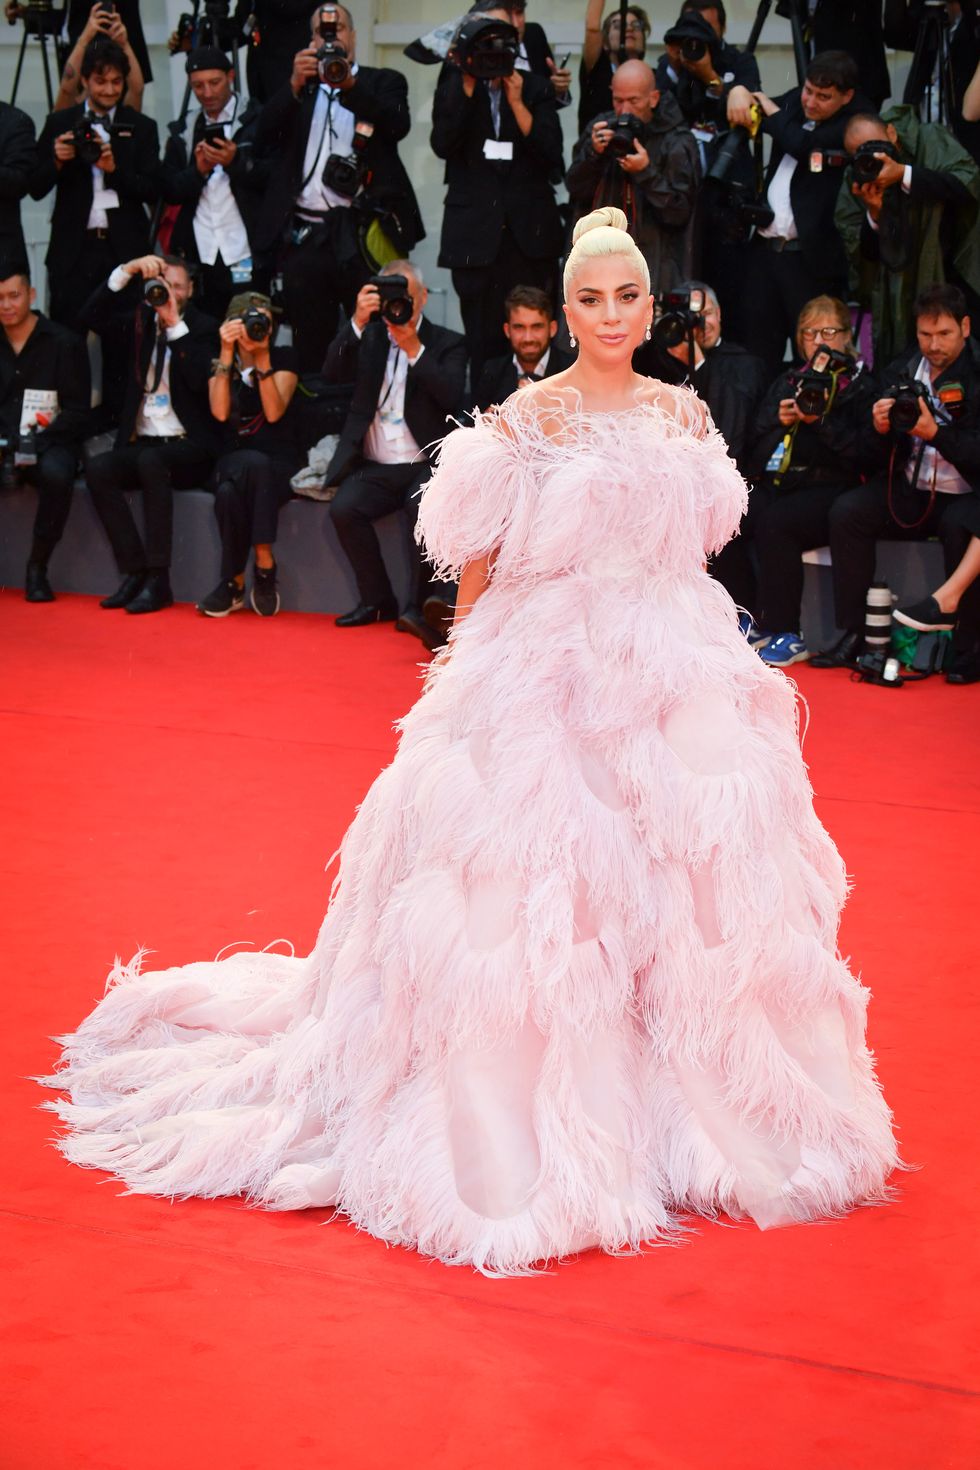 venice, italy   august 31  lady gaga walks the red carpet ahead of the a star is born screening during the 75th venice film festival at sala grande on august 31, 2018 in venice, italy  photo by stephane cardinale   corbiscorbis via getty images